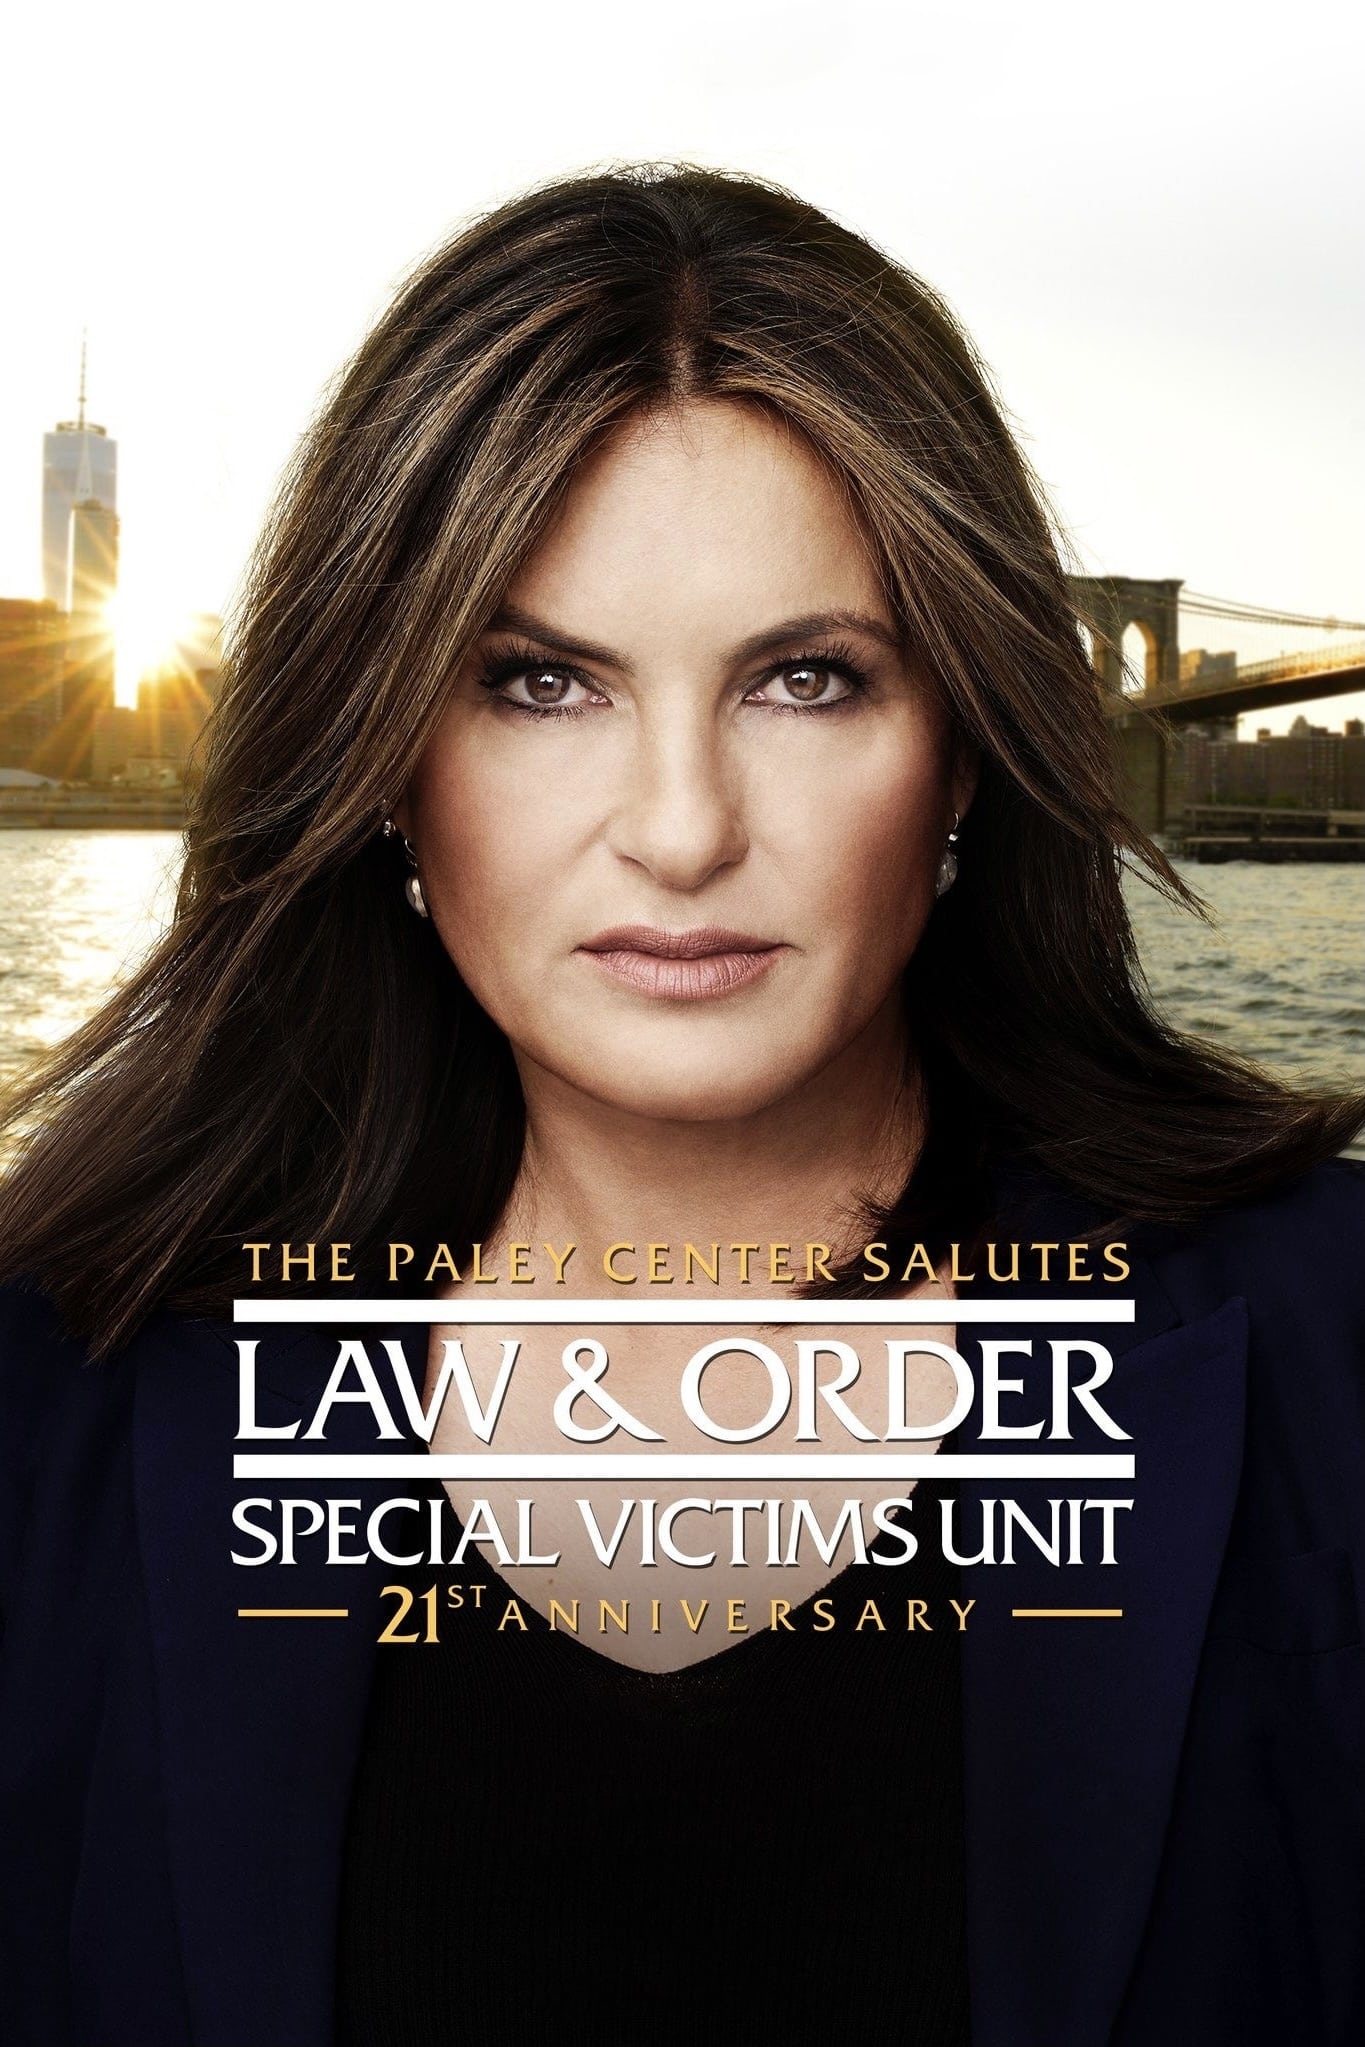 The Paley Center Salutes Law & Order: SVU (2020)